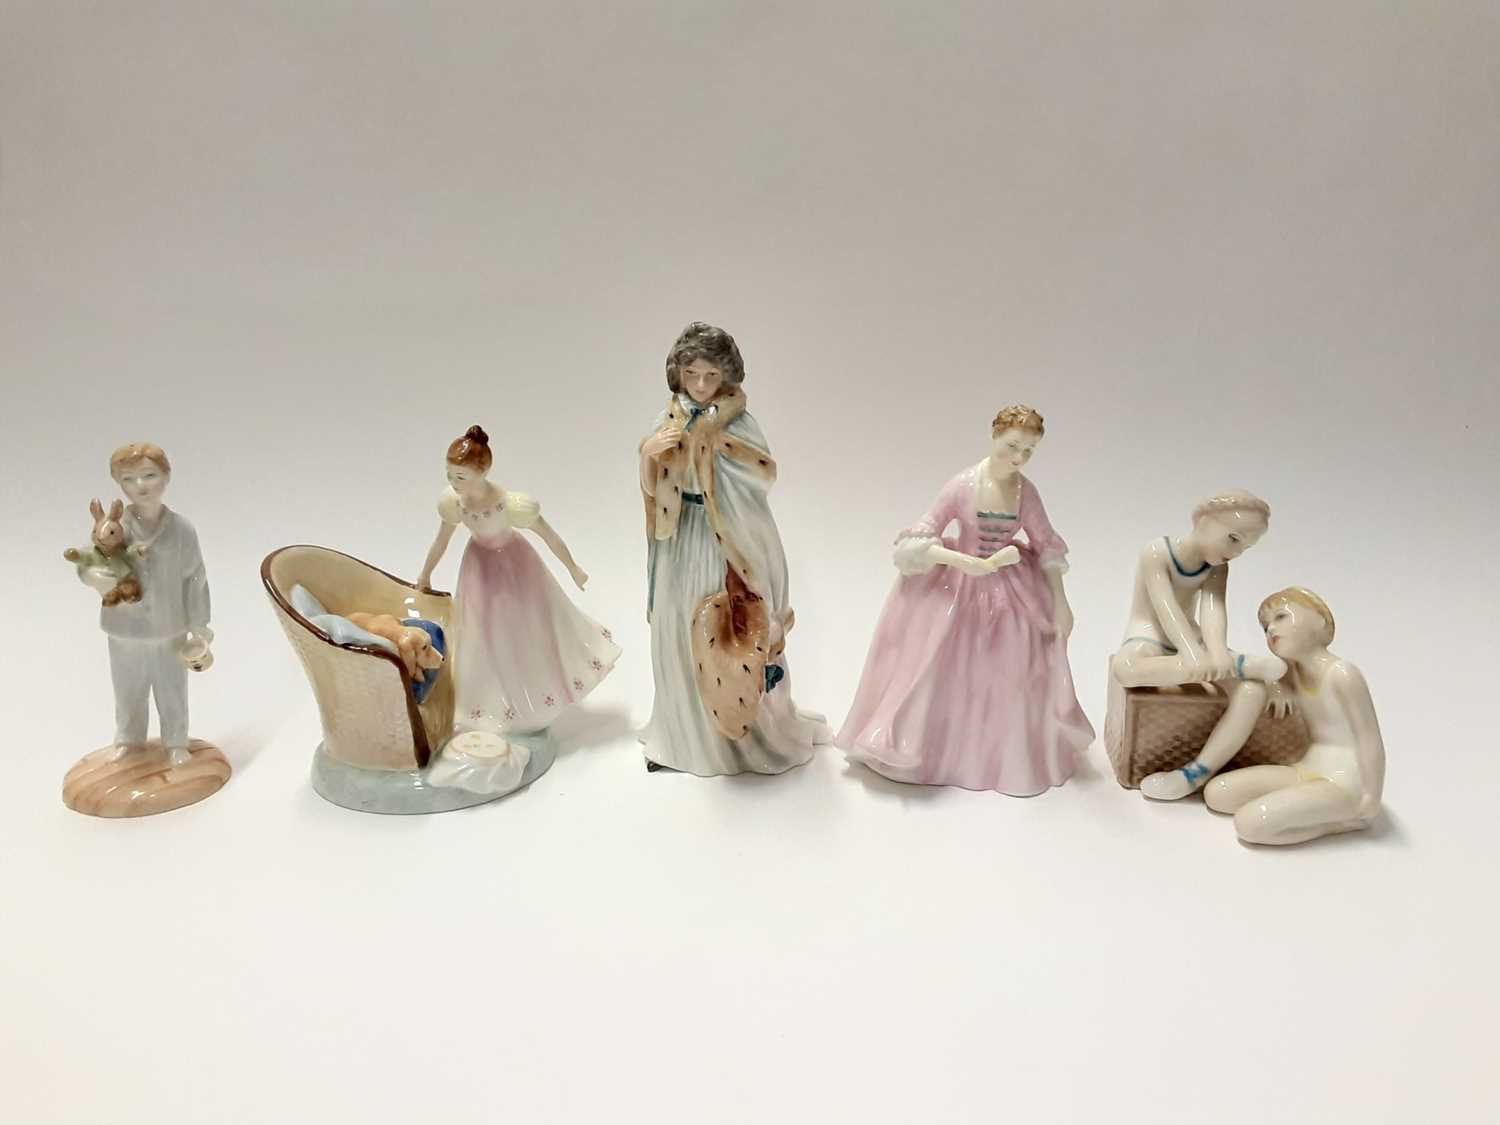 Lot 78 - Five Royal Doulton figures - Beat You To It HN2871, Ballet Class HN3134, A Hostess of Williamsburg HN2209, Countess Of Derby HN3442 and Lights Out HN4465